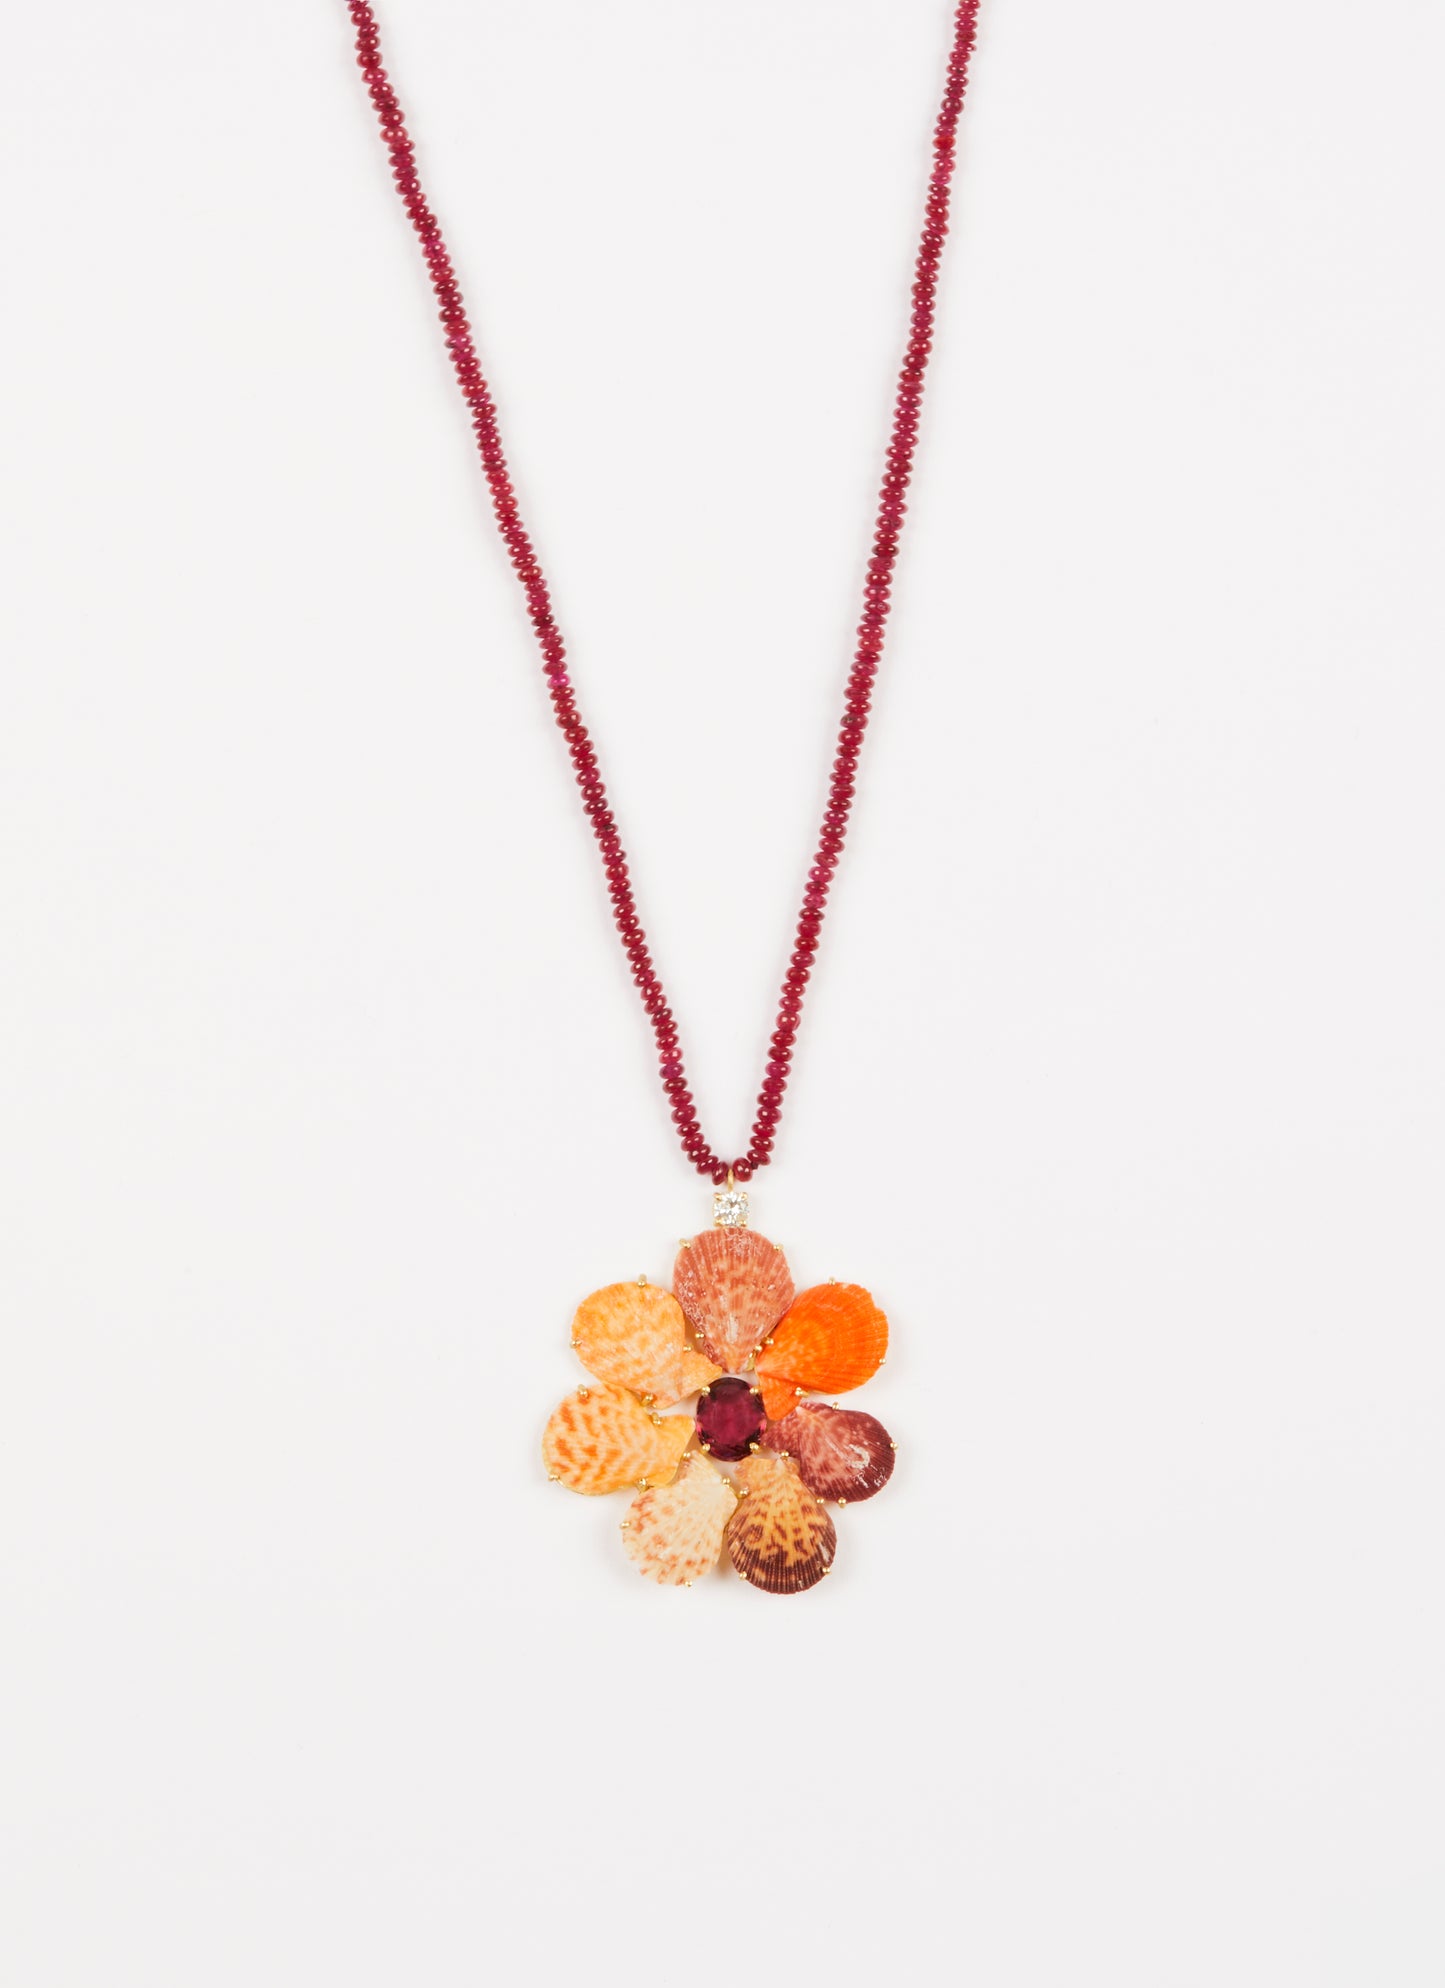 Ruby Beads with Shell Flower, Diamond and Garnet